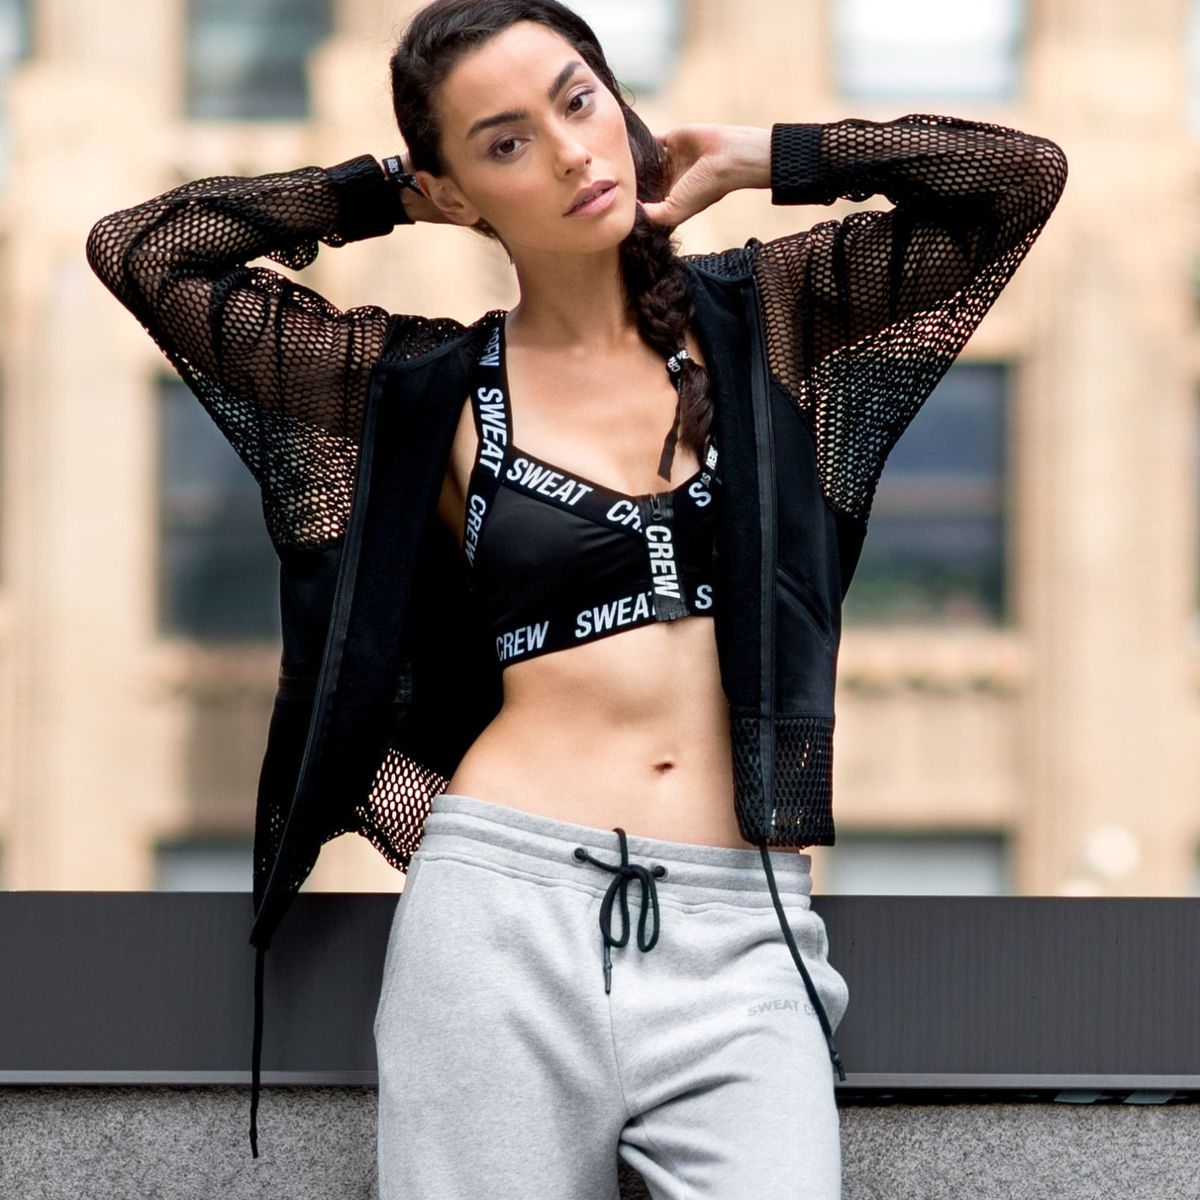 Sweat Crew by Adrianne Ho - Workout Gear Collaboration from Pac